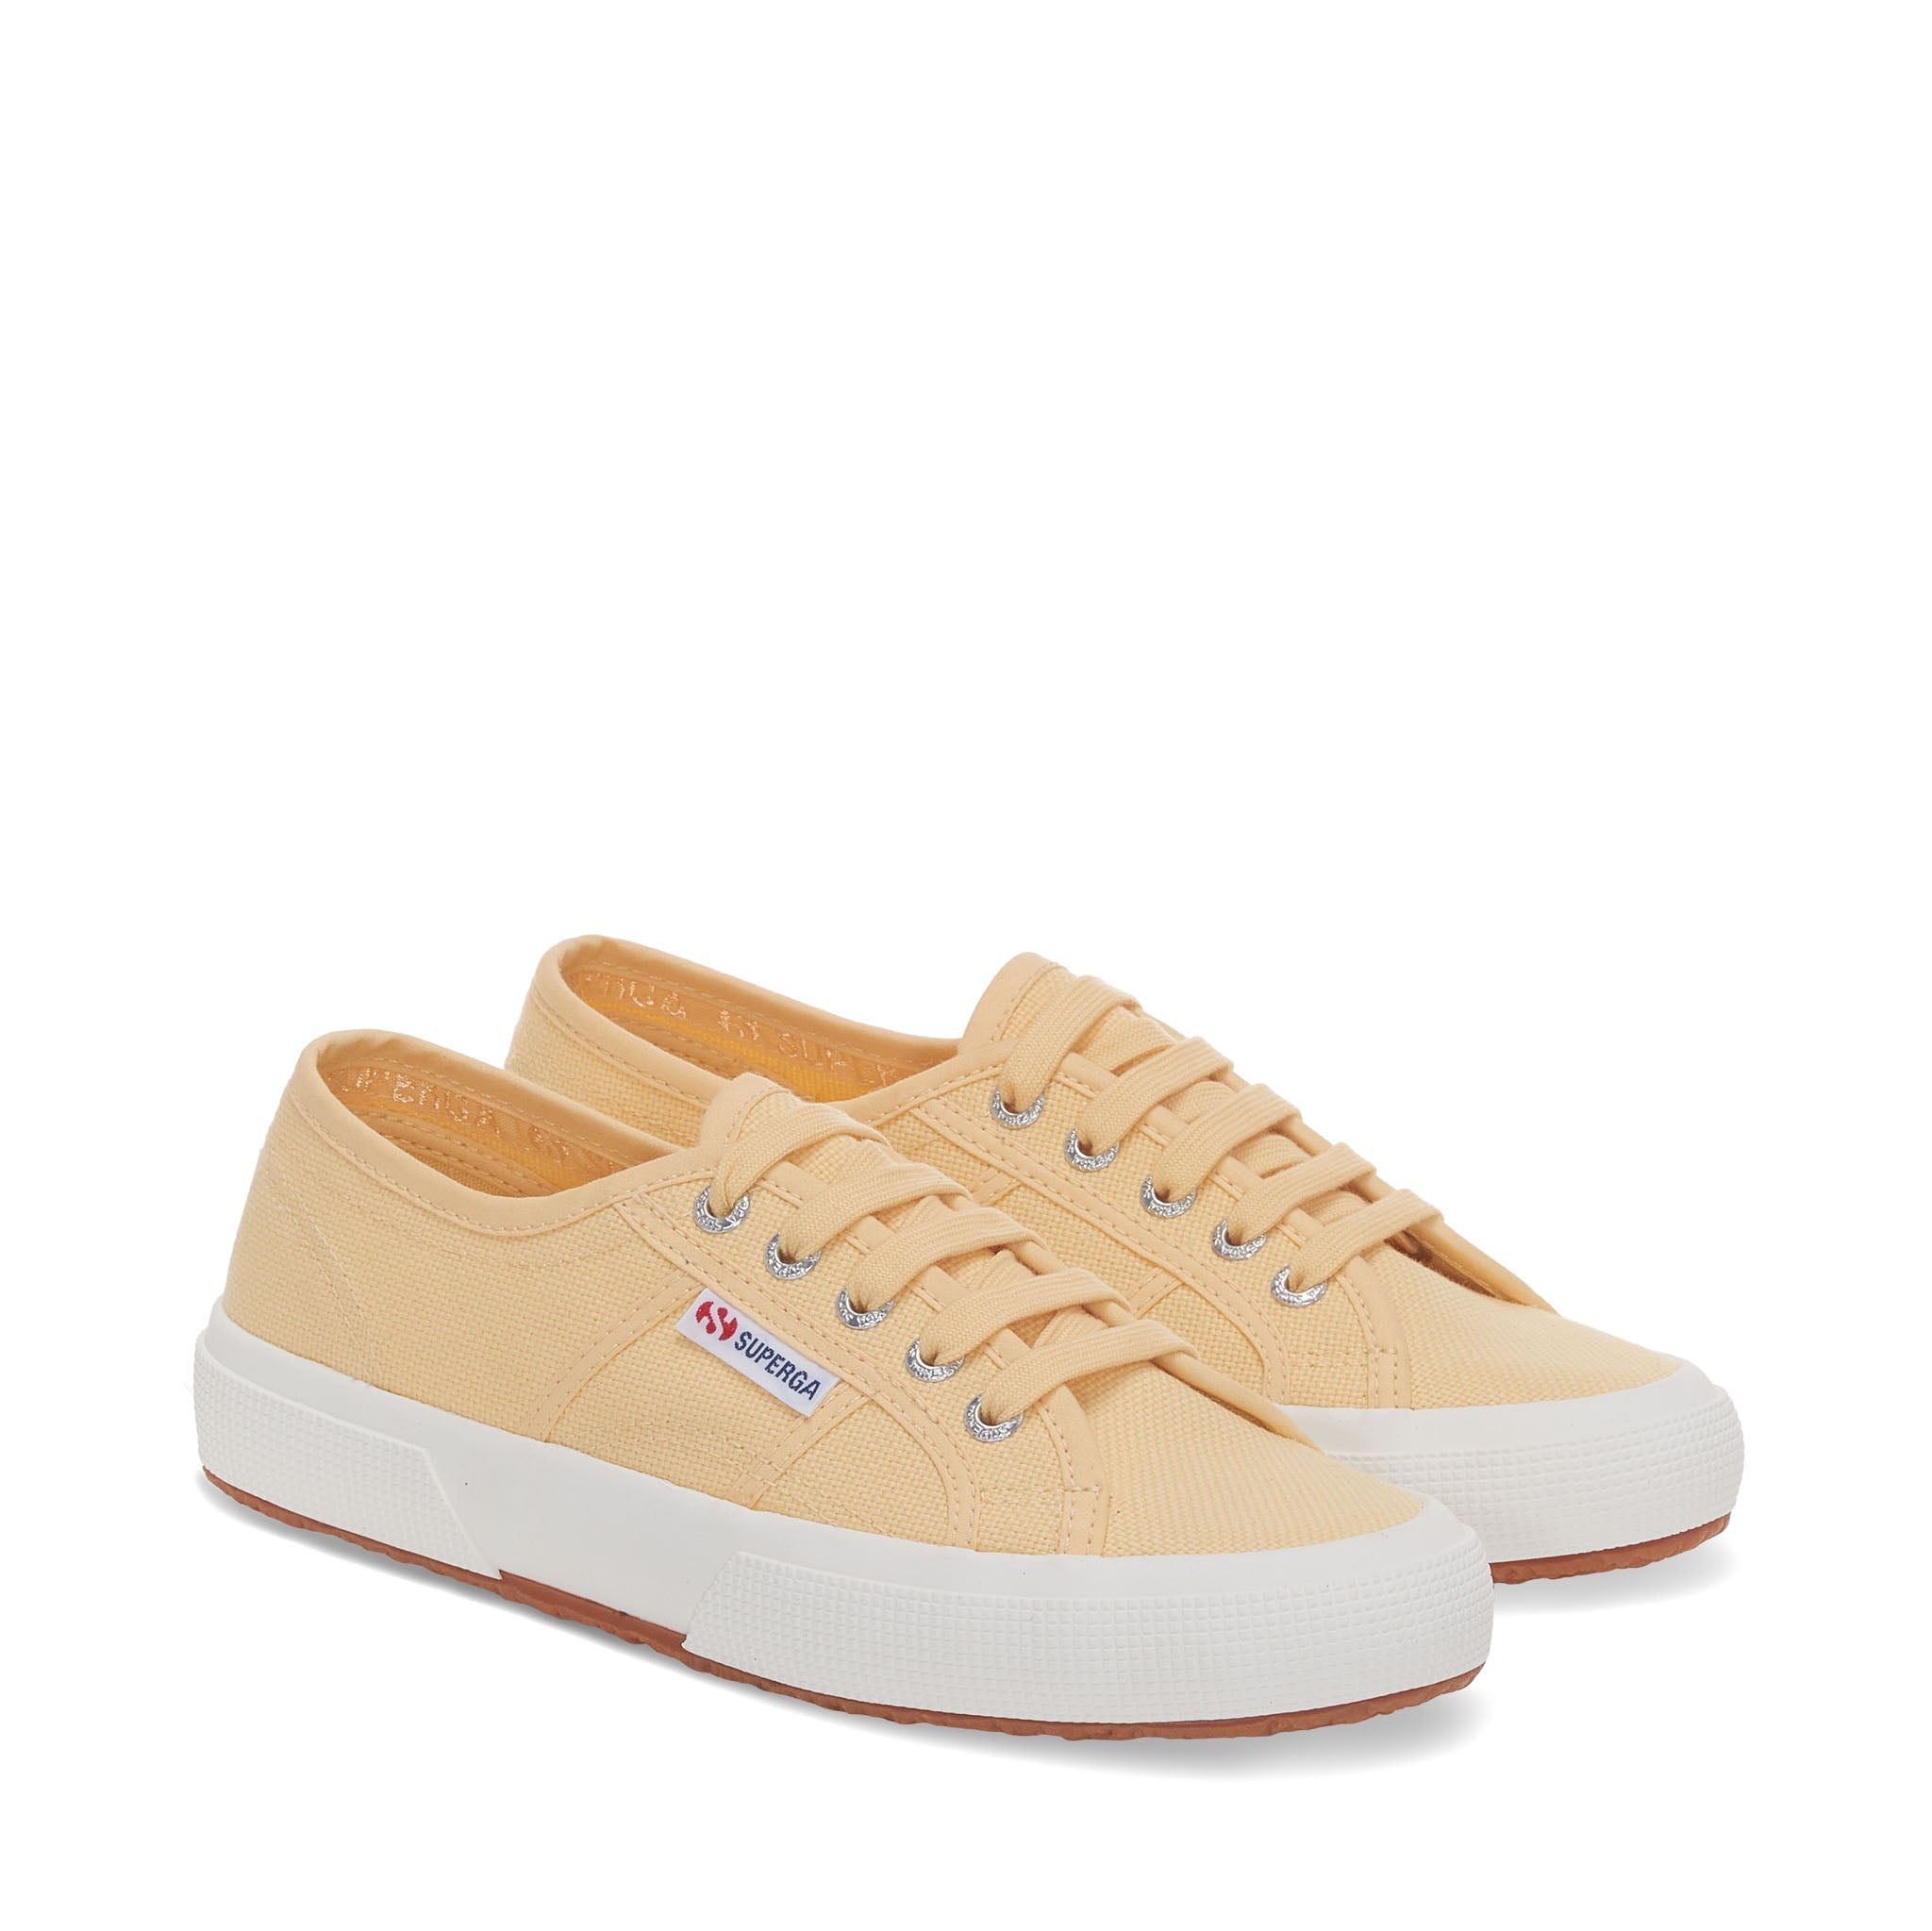 Superga 2750 Cotu Classic Sneakers - Light Yellow. Front view.